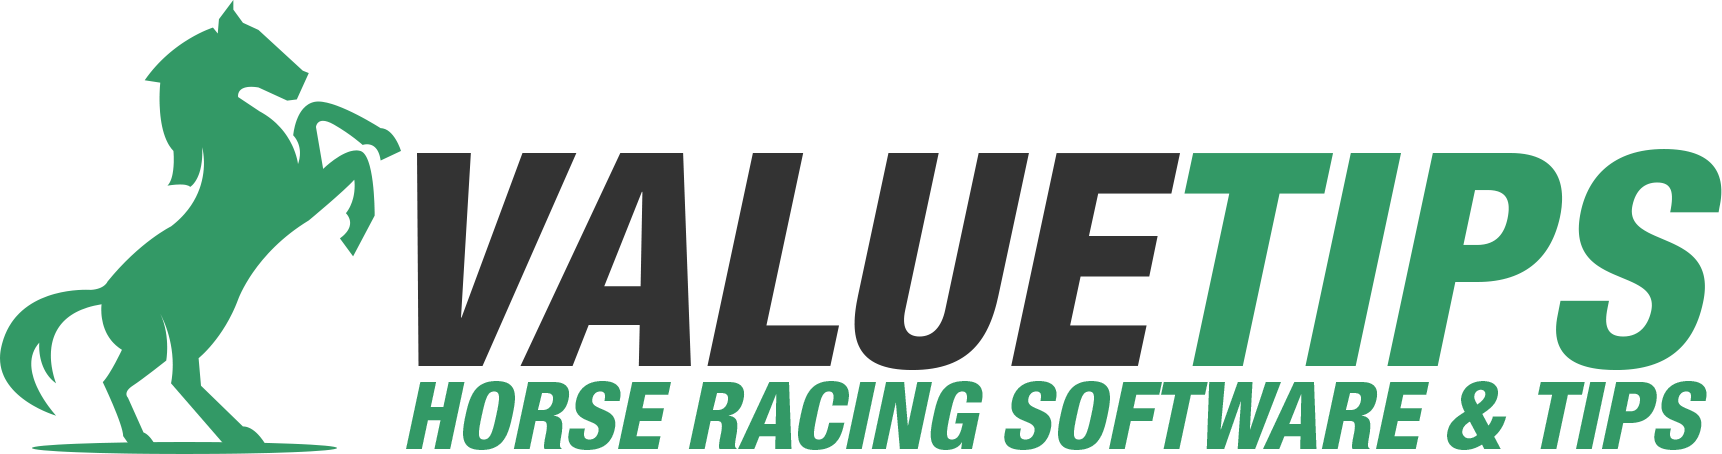 Horse Racing Value Tips & Software